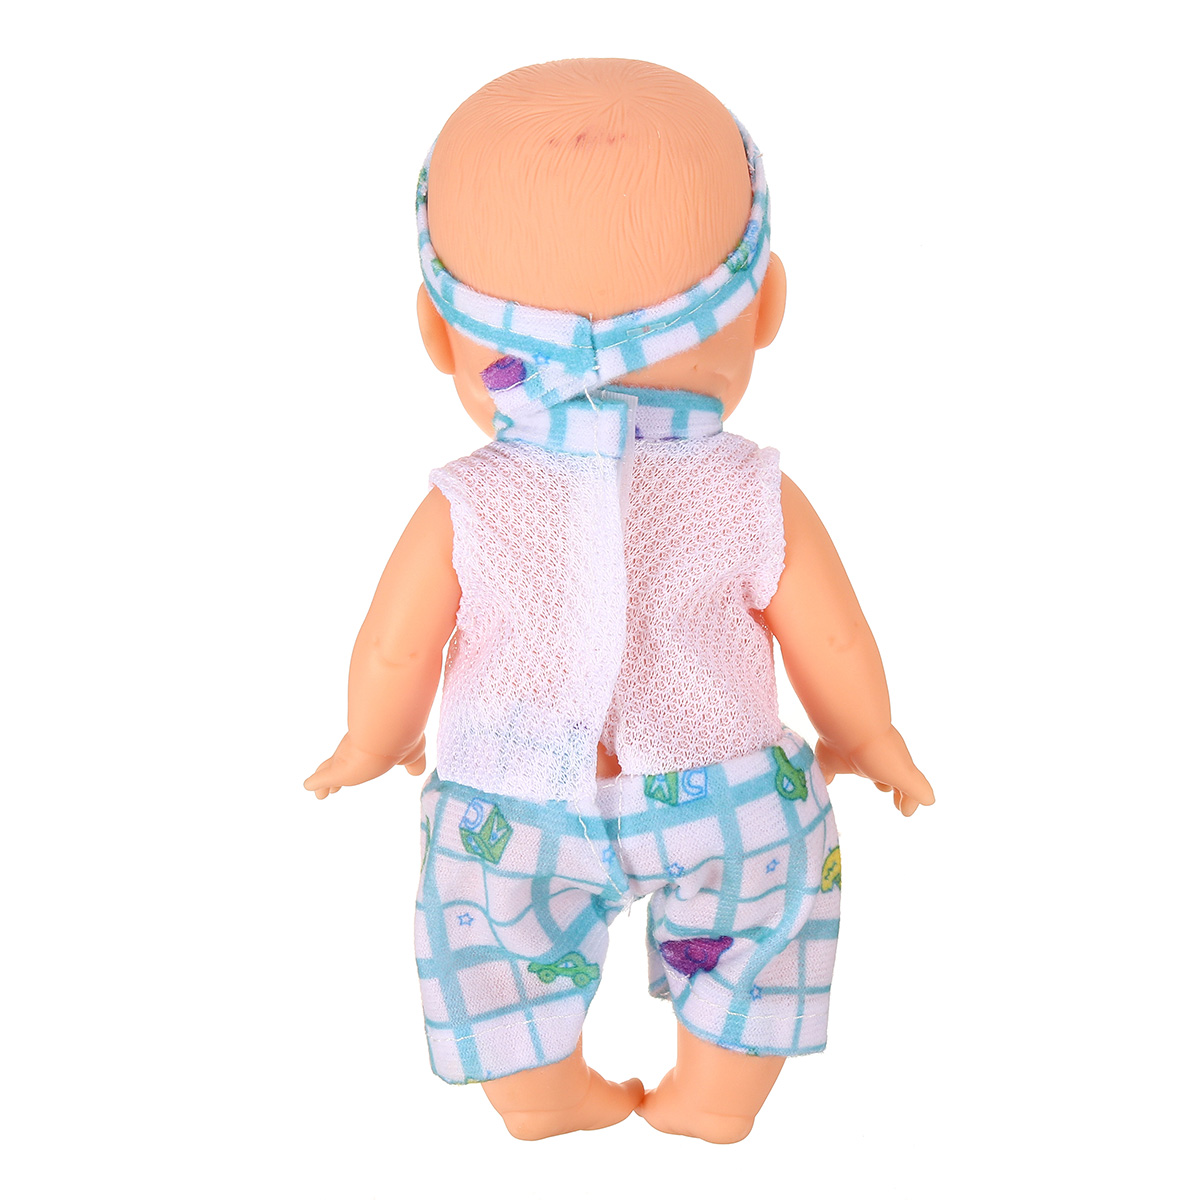 Simulation-Baby-3D-Creative-Cute-Doll-Play-House-Toy-Doll-Vinyl-Doll-Gift-1818655-12